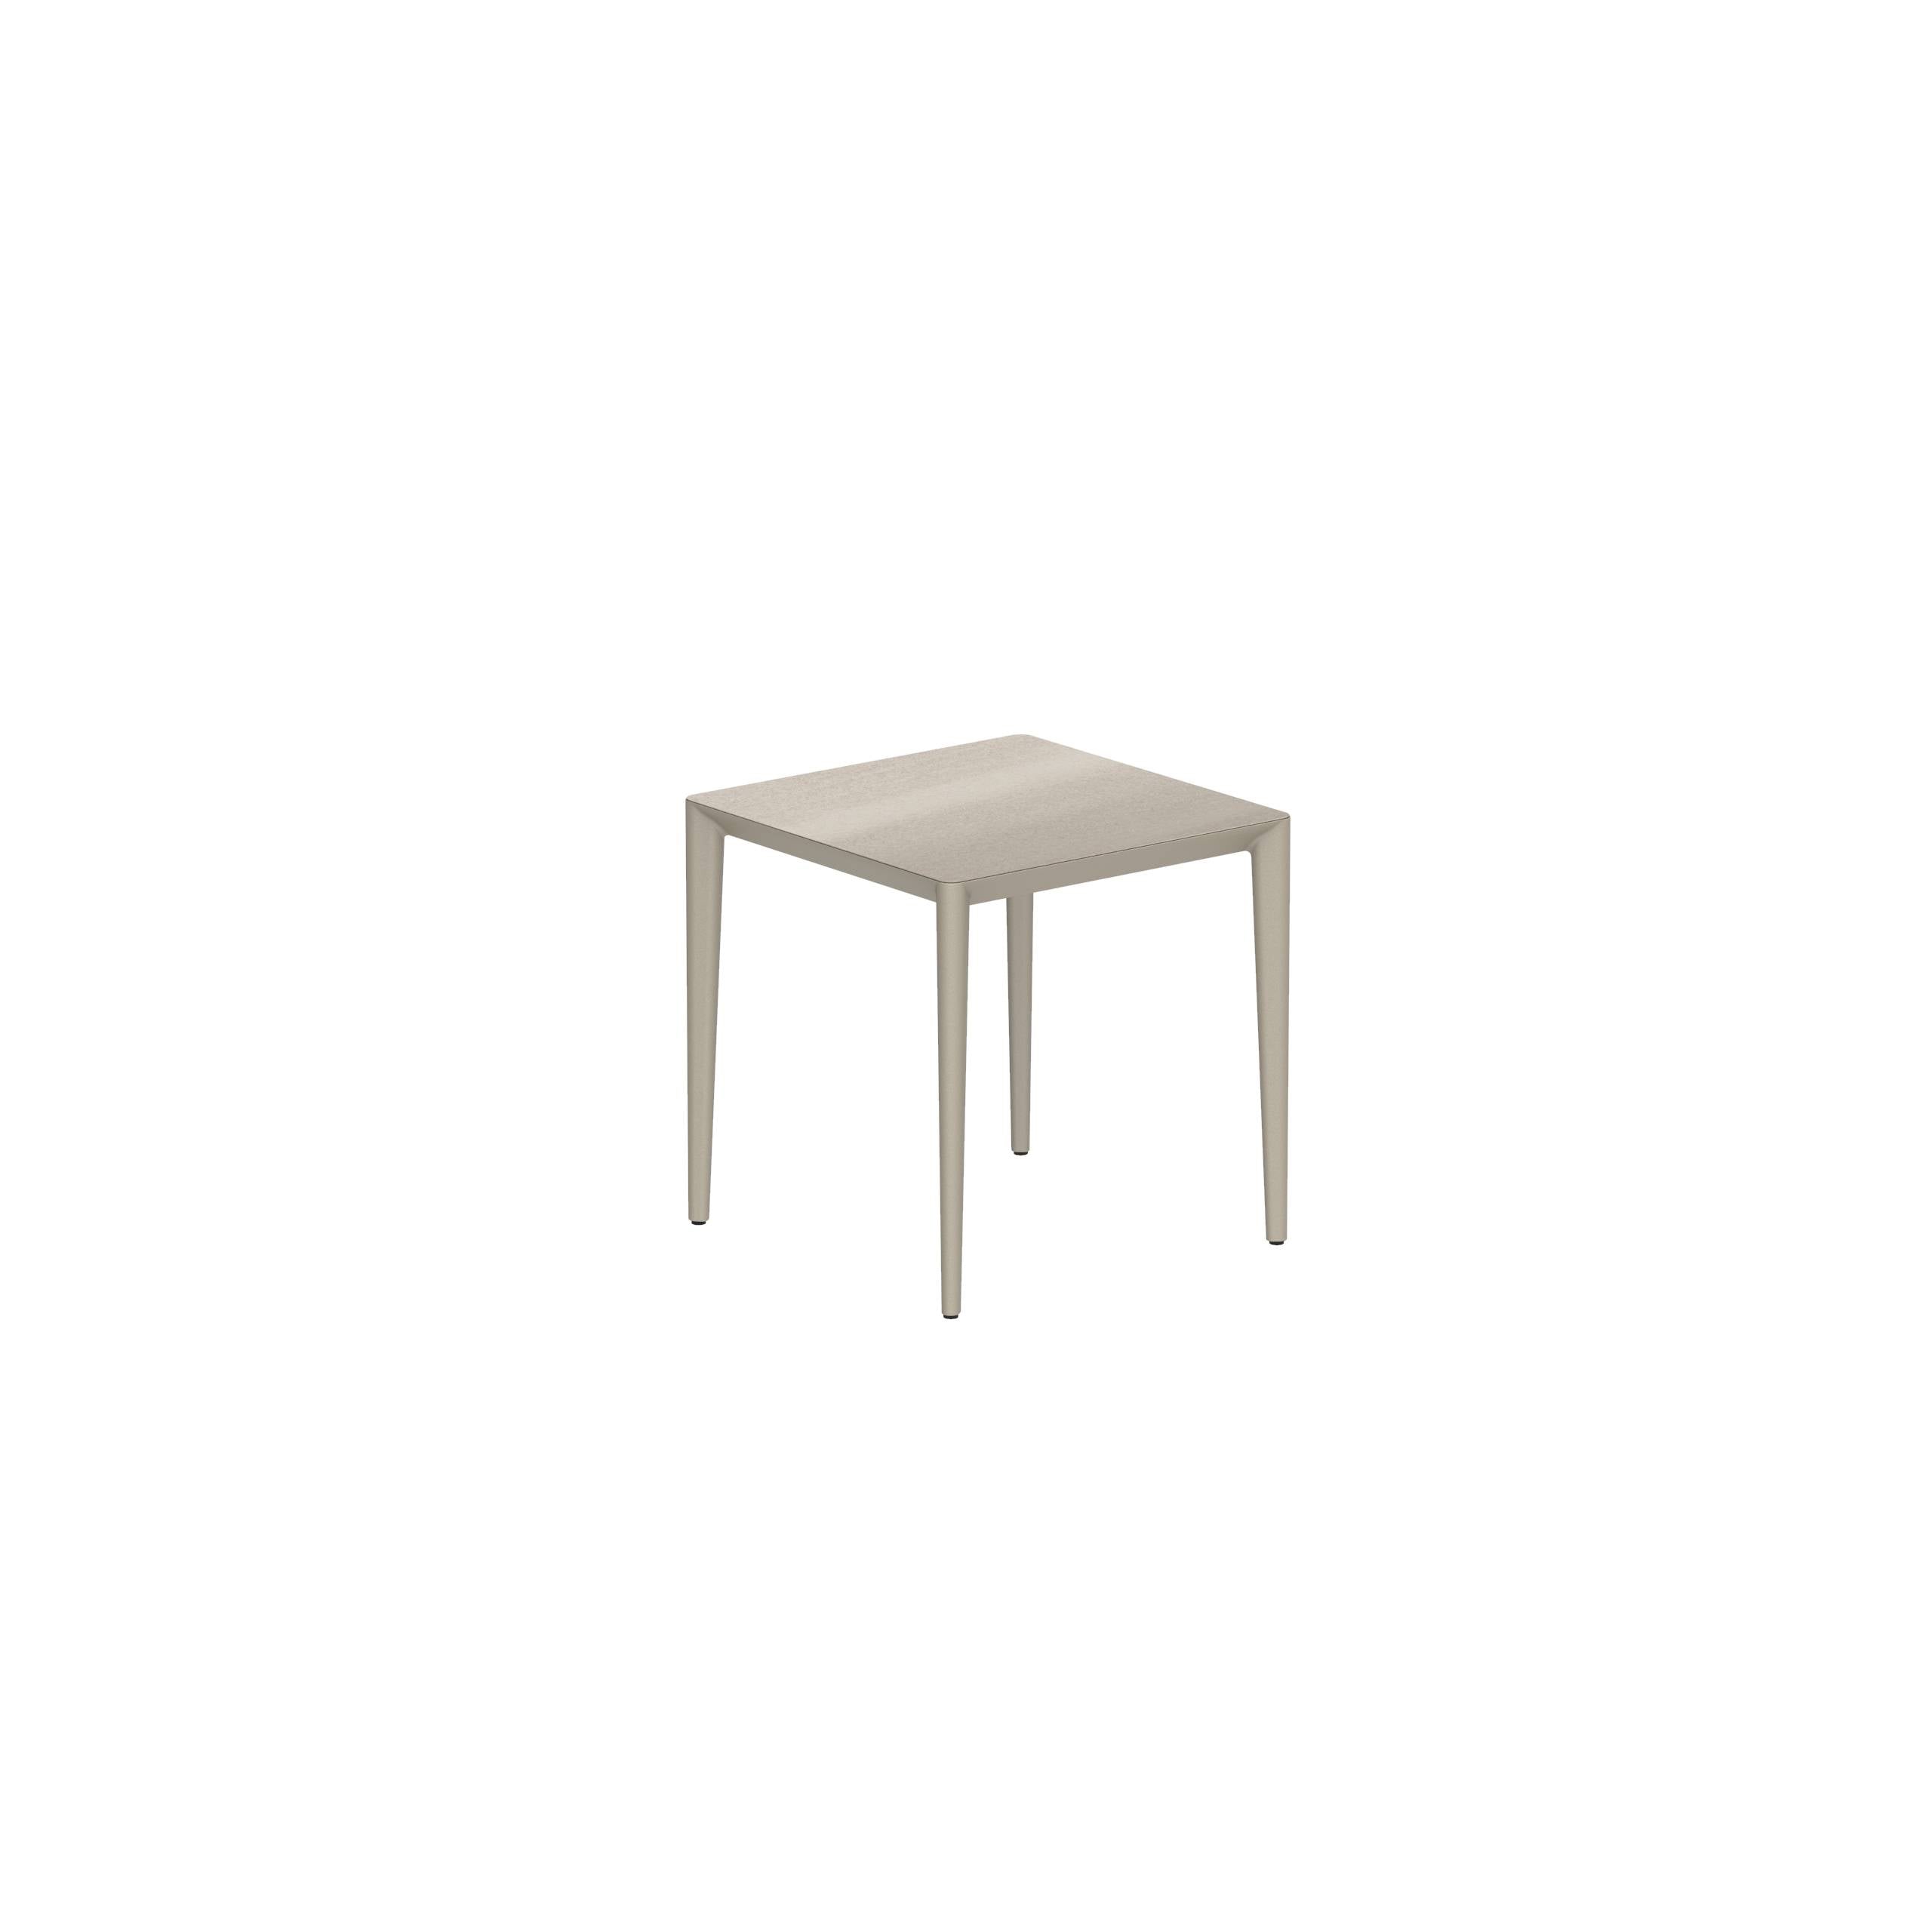 U-Nite Table 74x74cm Sand With Ceramic Tabletop In Taupe Grey